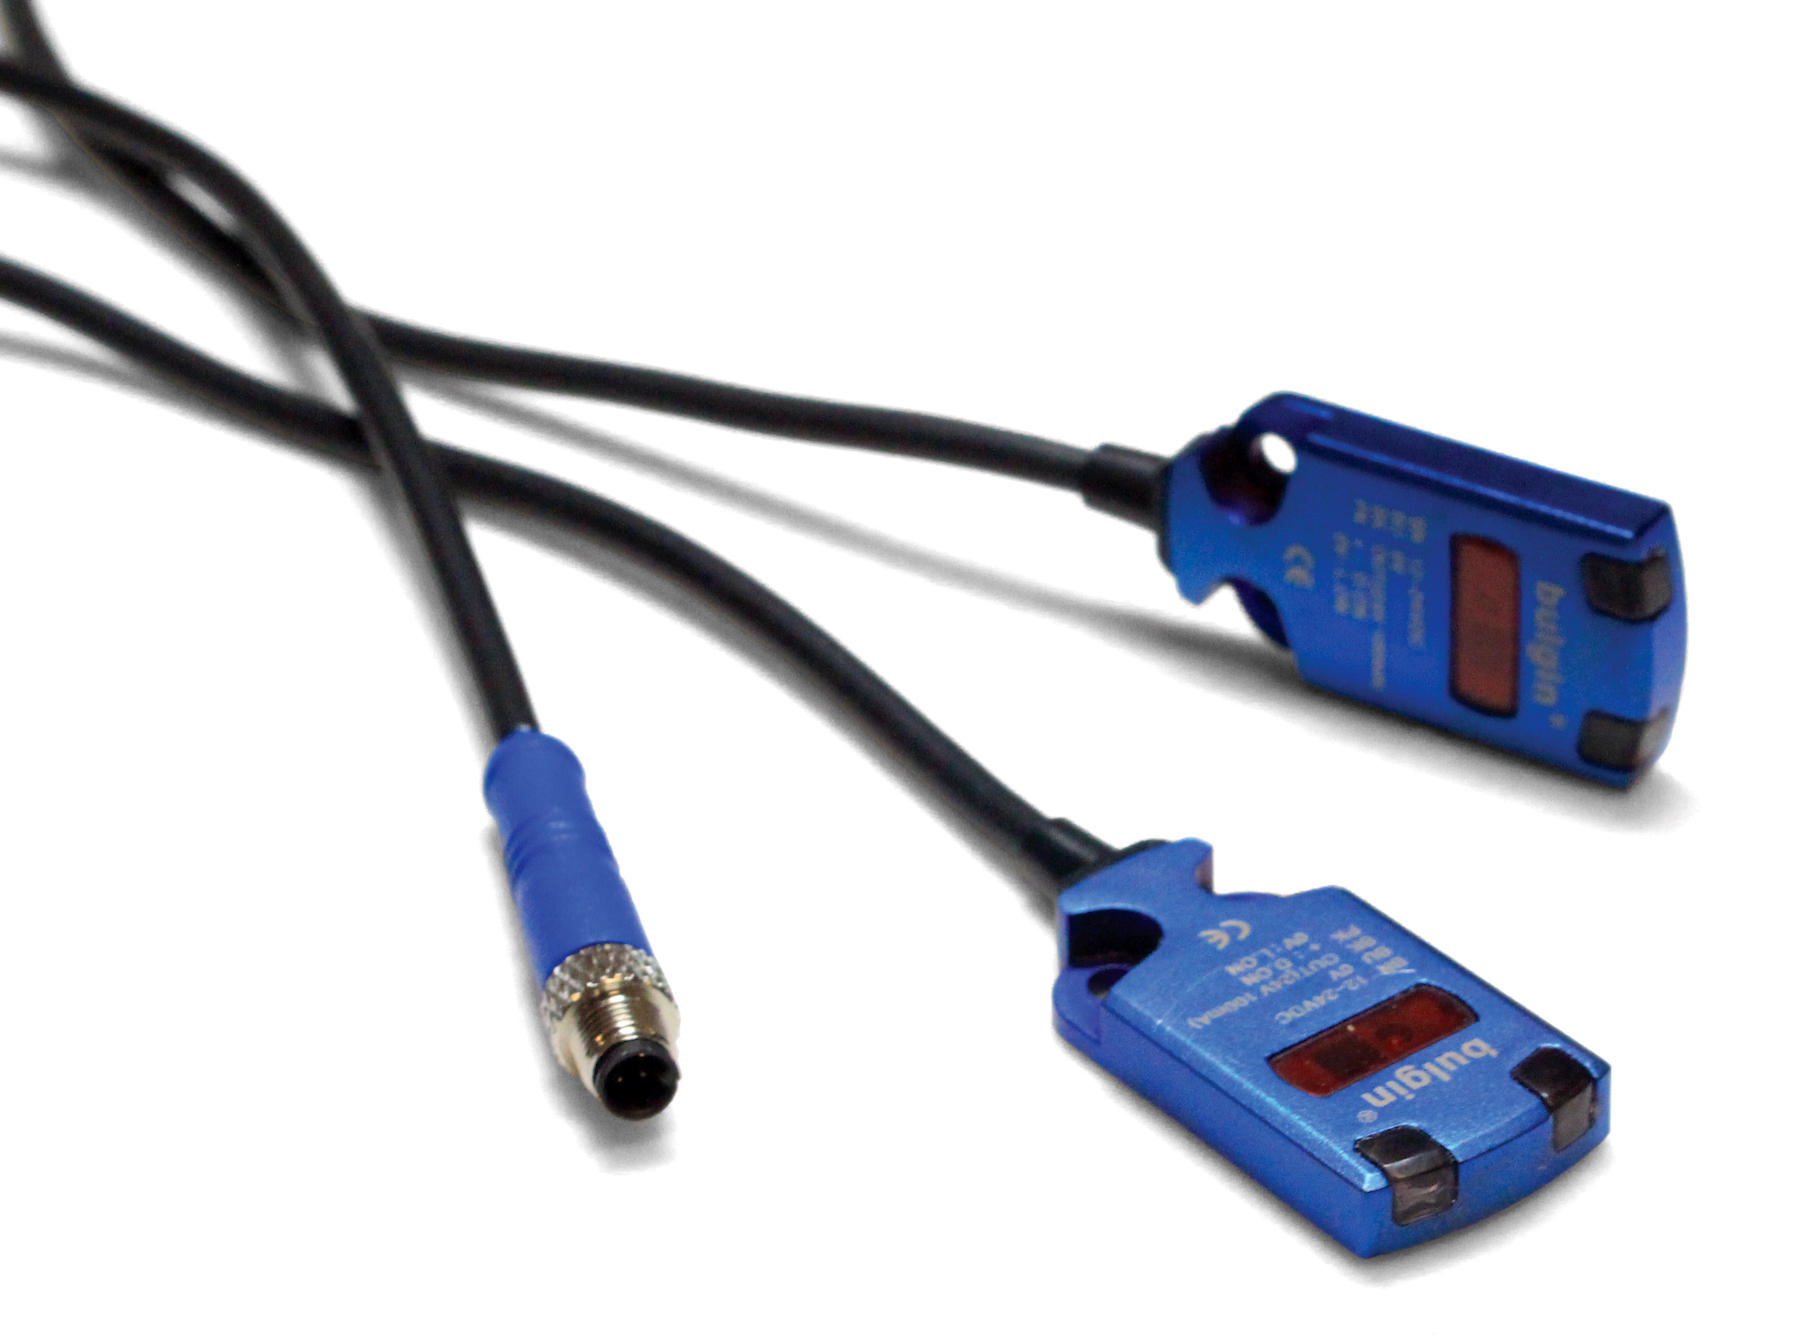 New Connector and Cable Products: April 2019 - Bulgin's SL Series Photoelectric Sensors